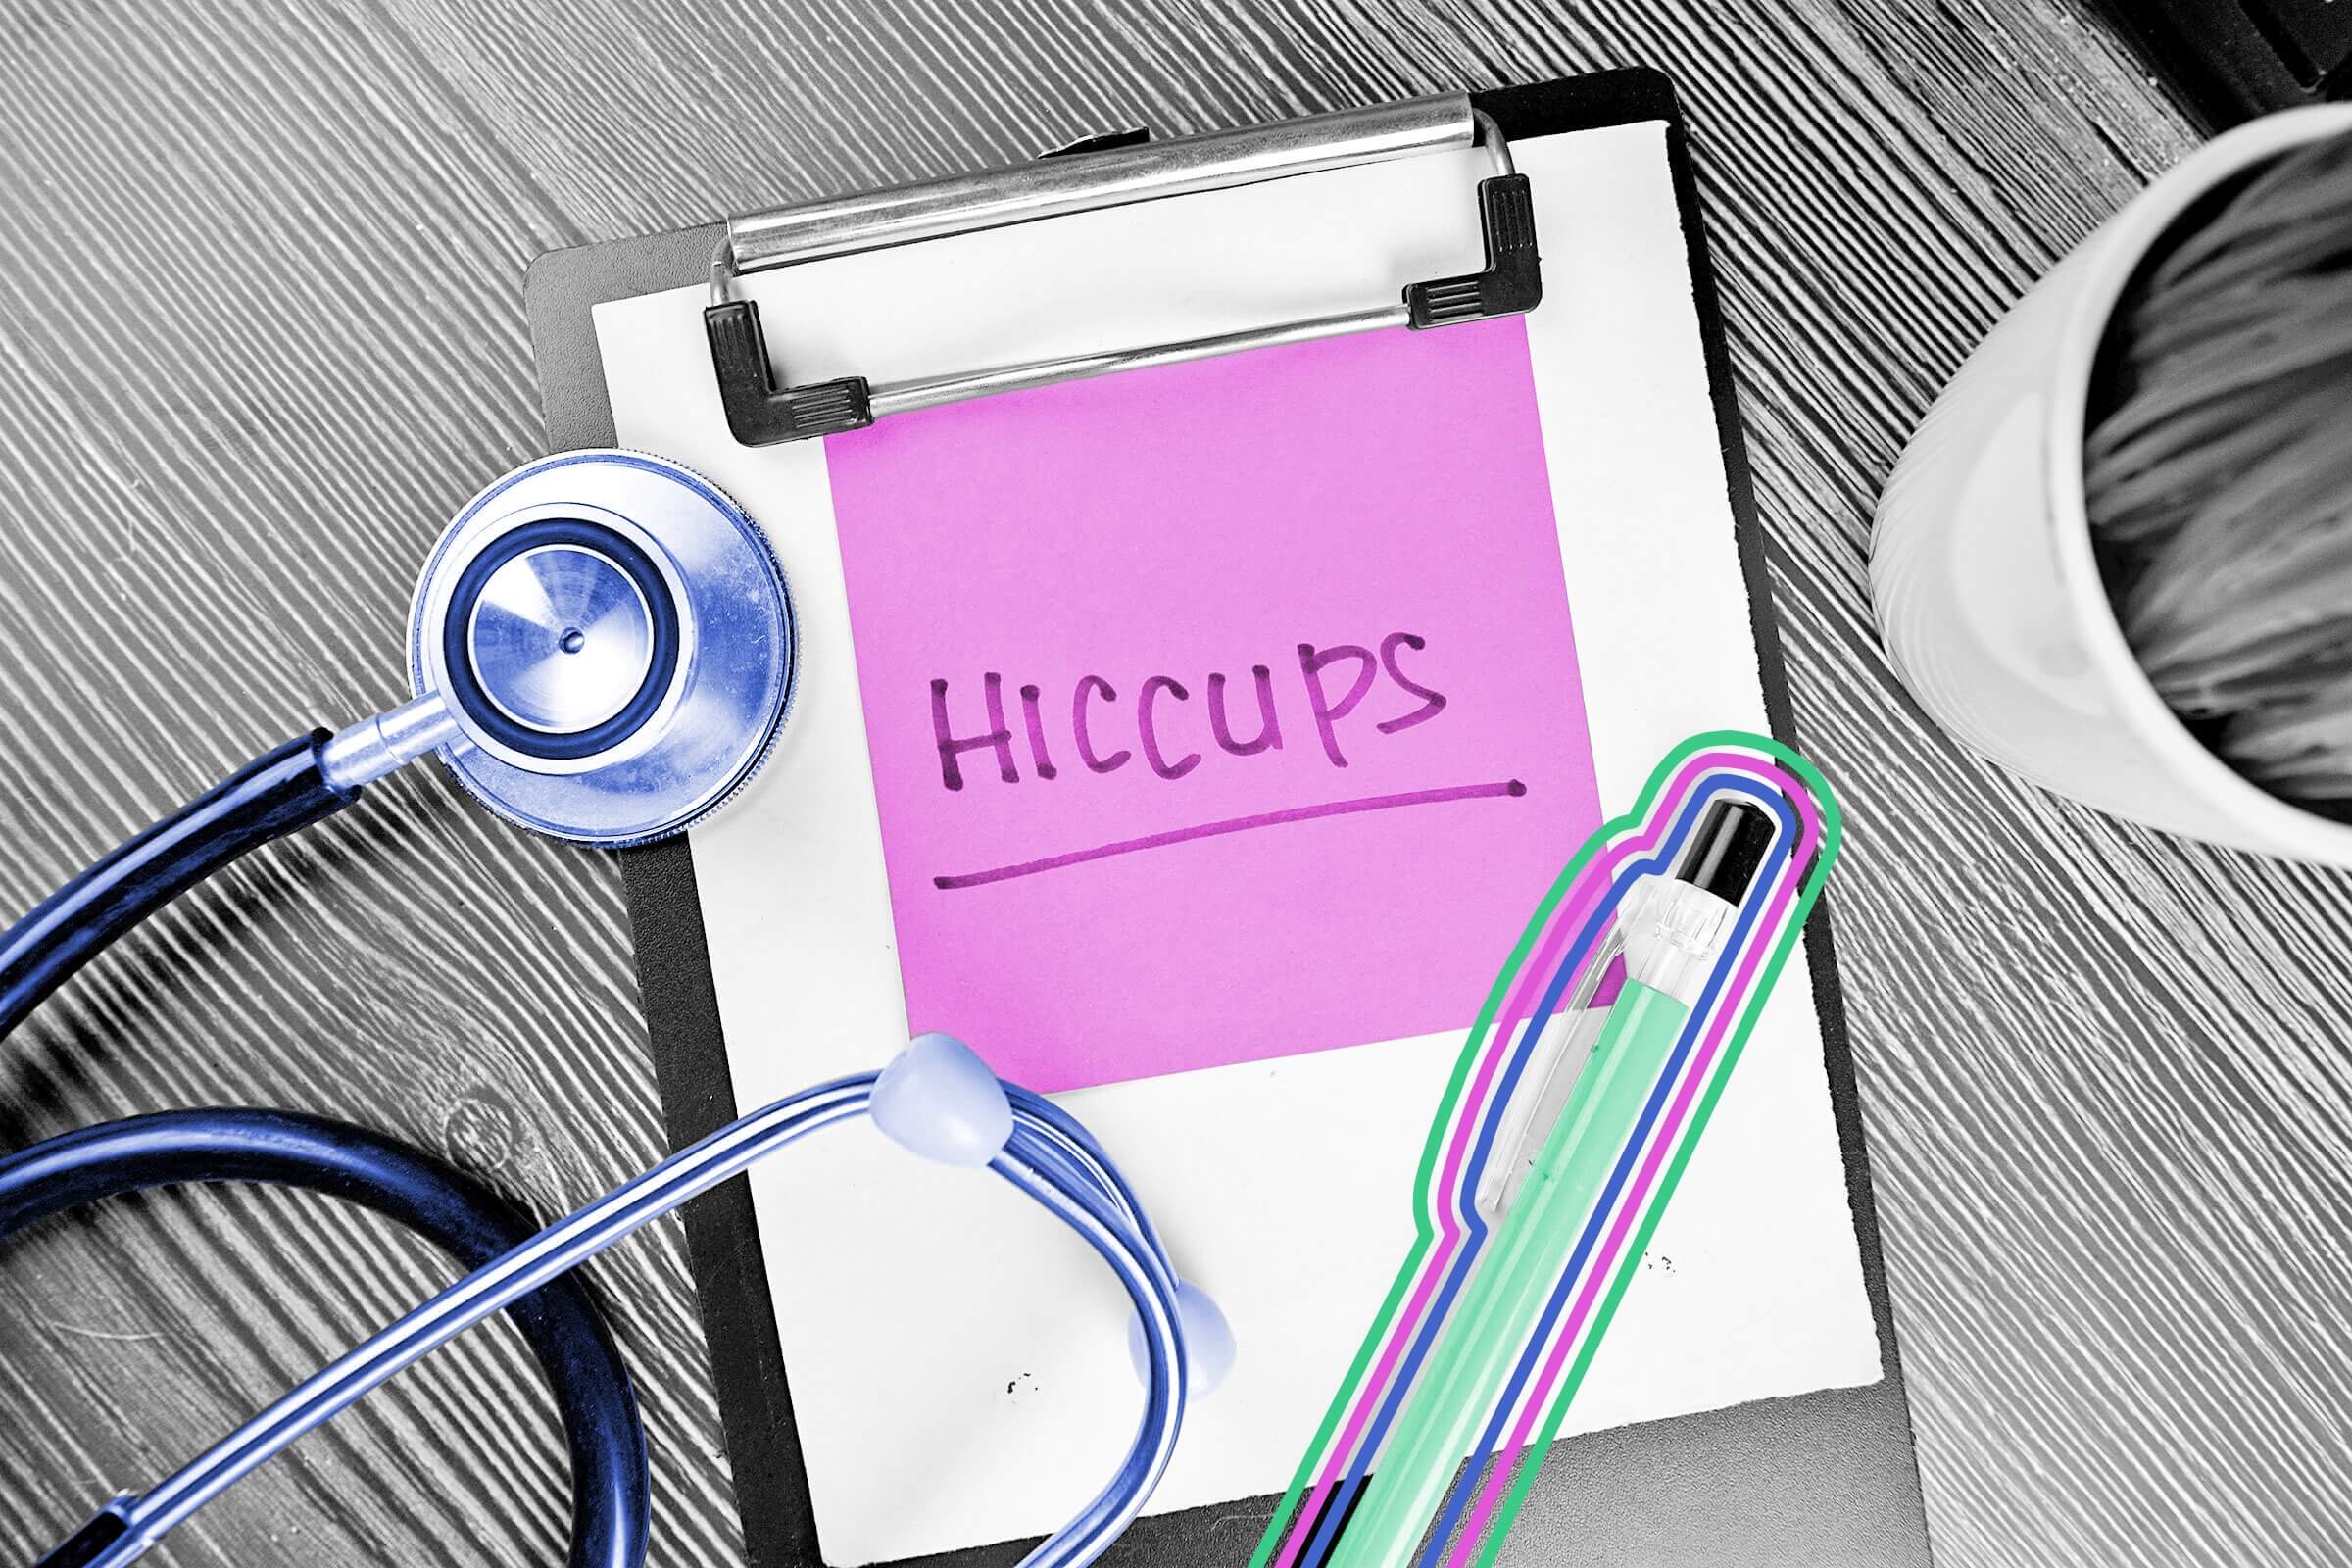 The longest case of hiccups was 68 years.